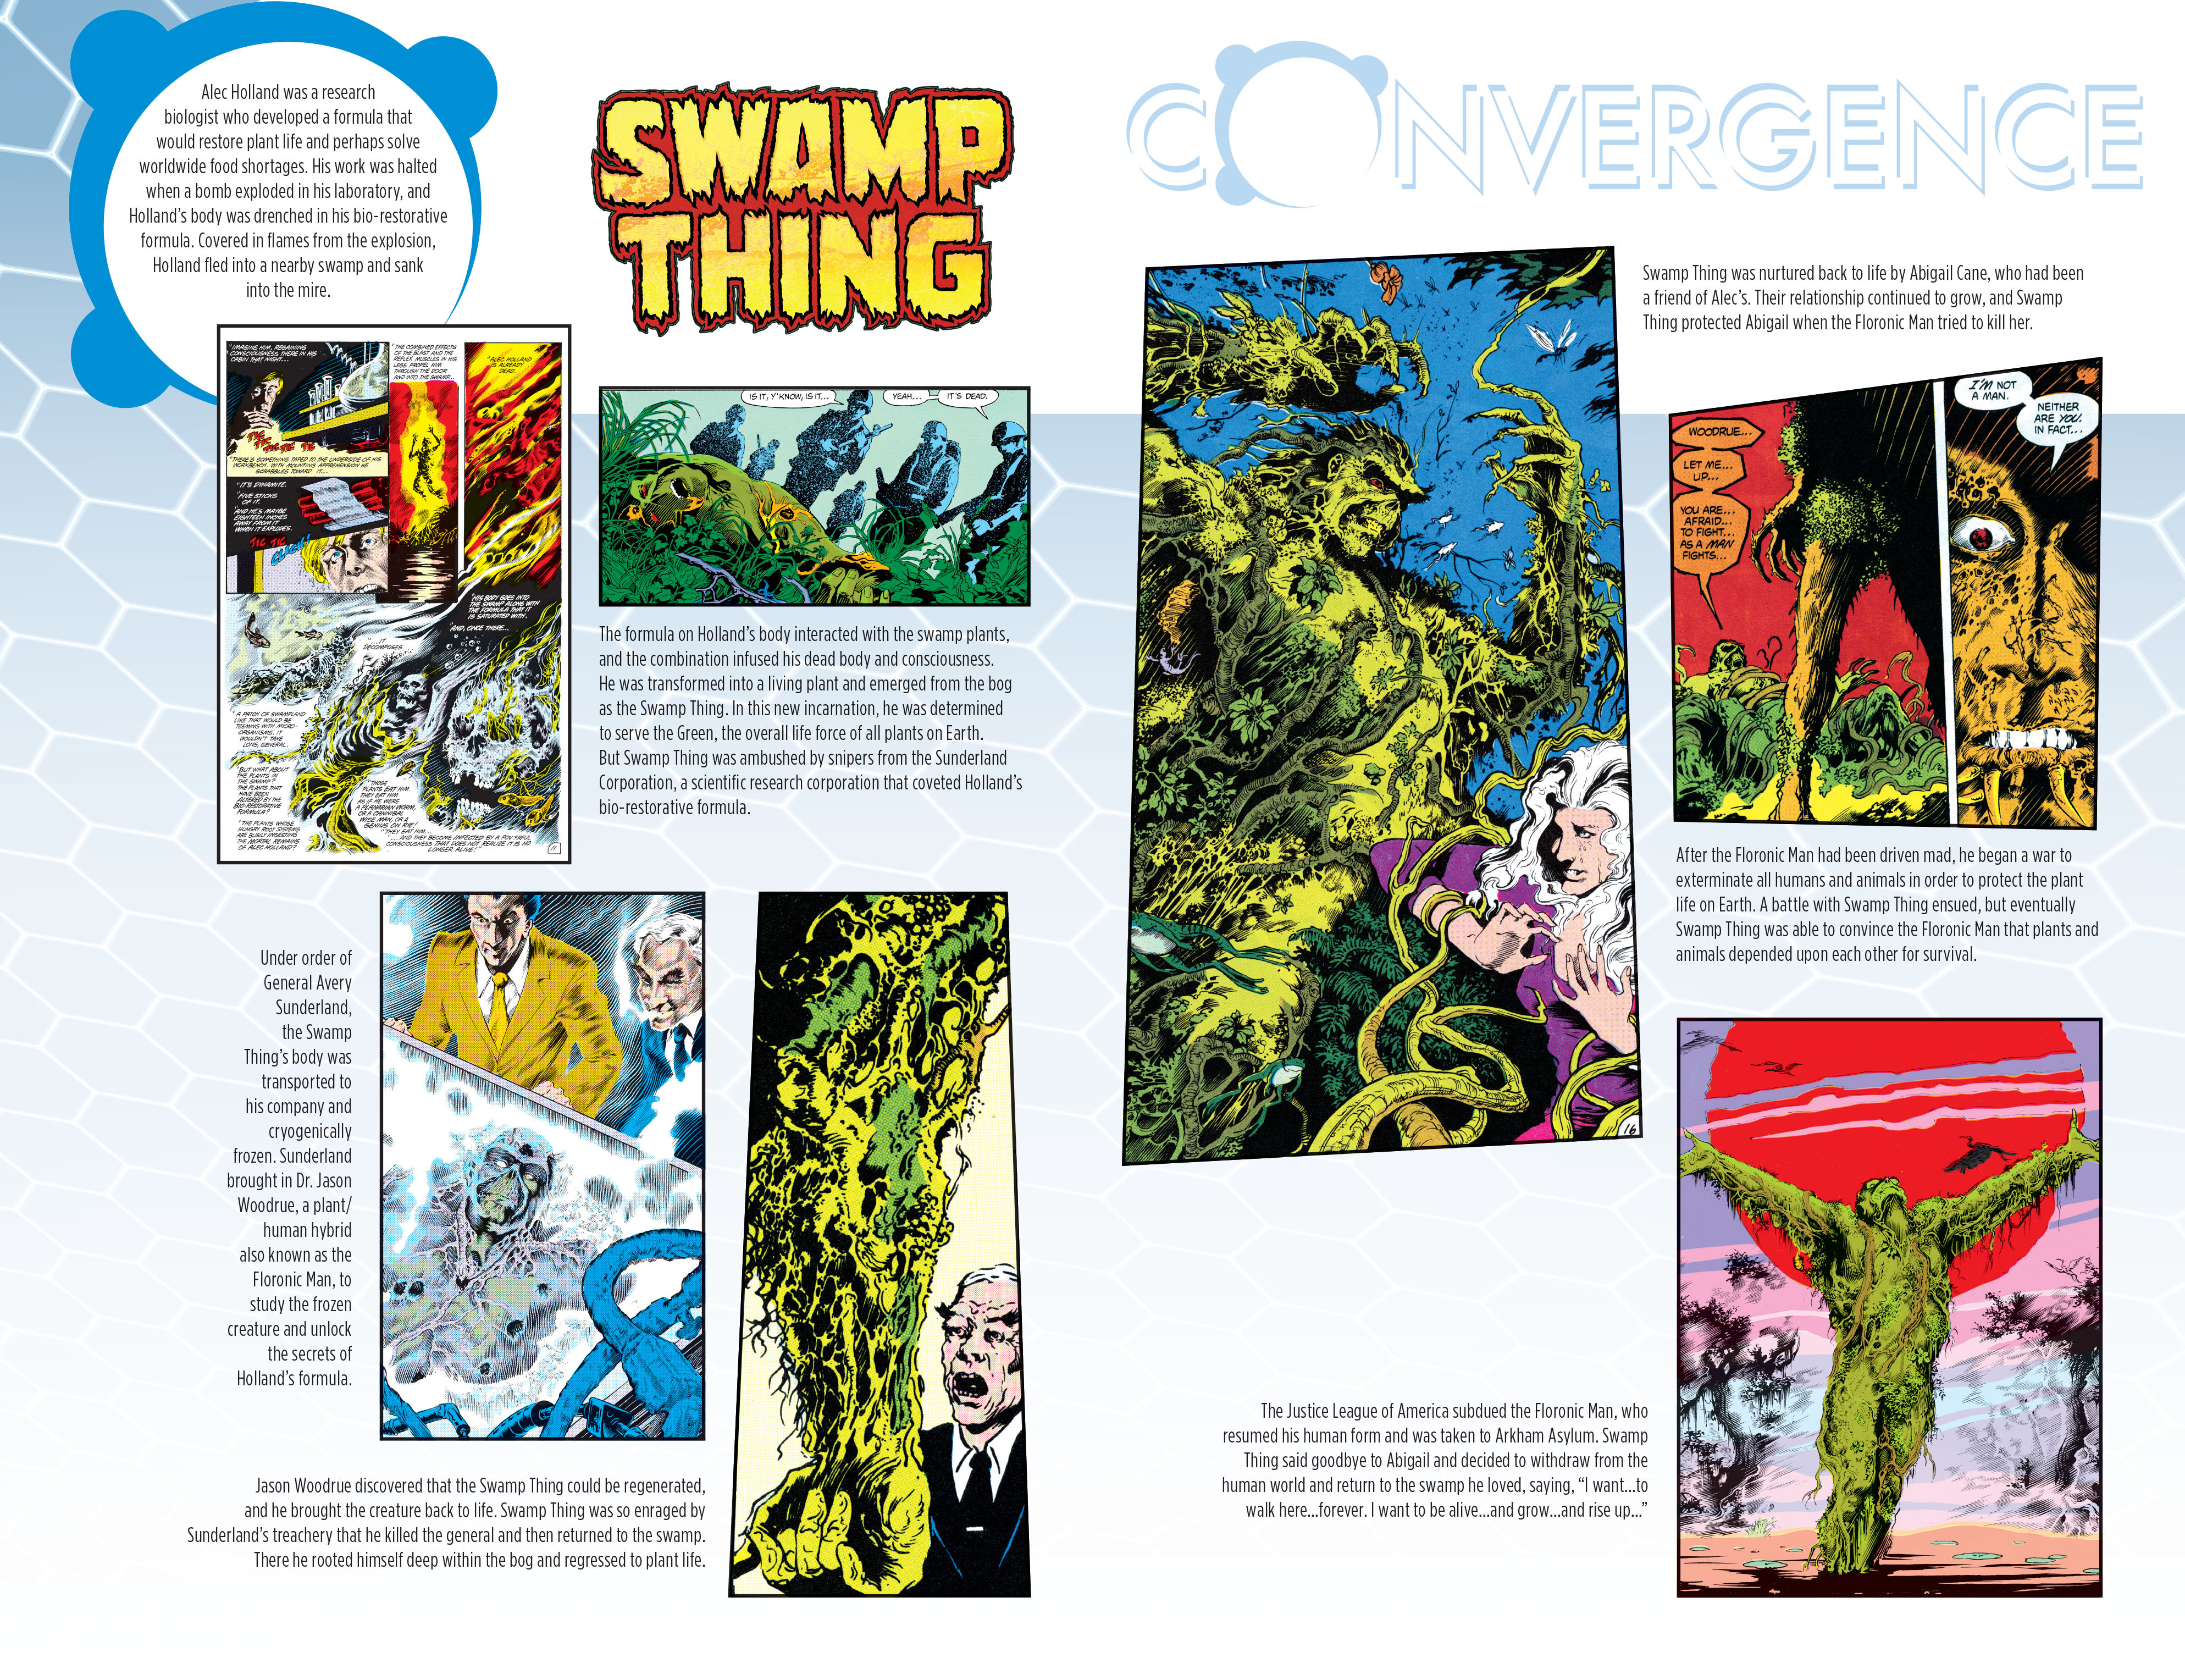 Read online Convergence Swamp Thing comic -  Issue #1 - 25